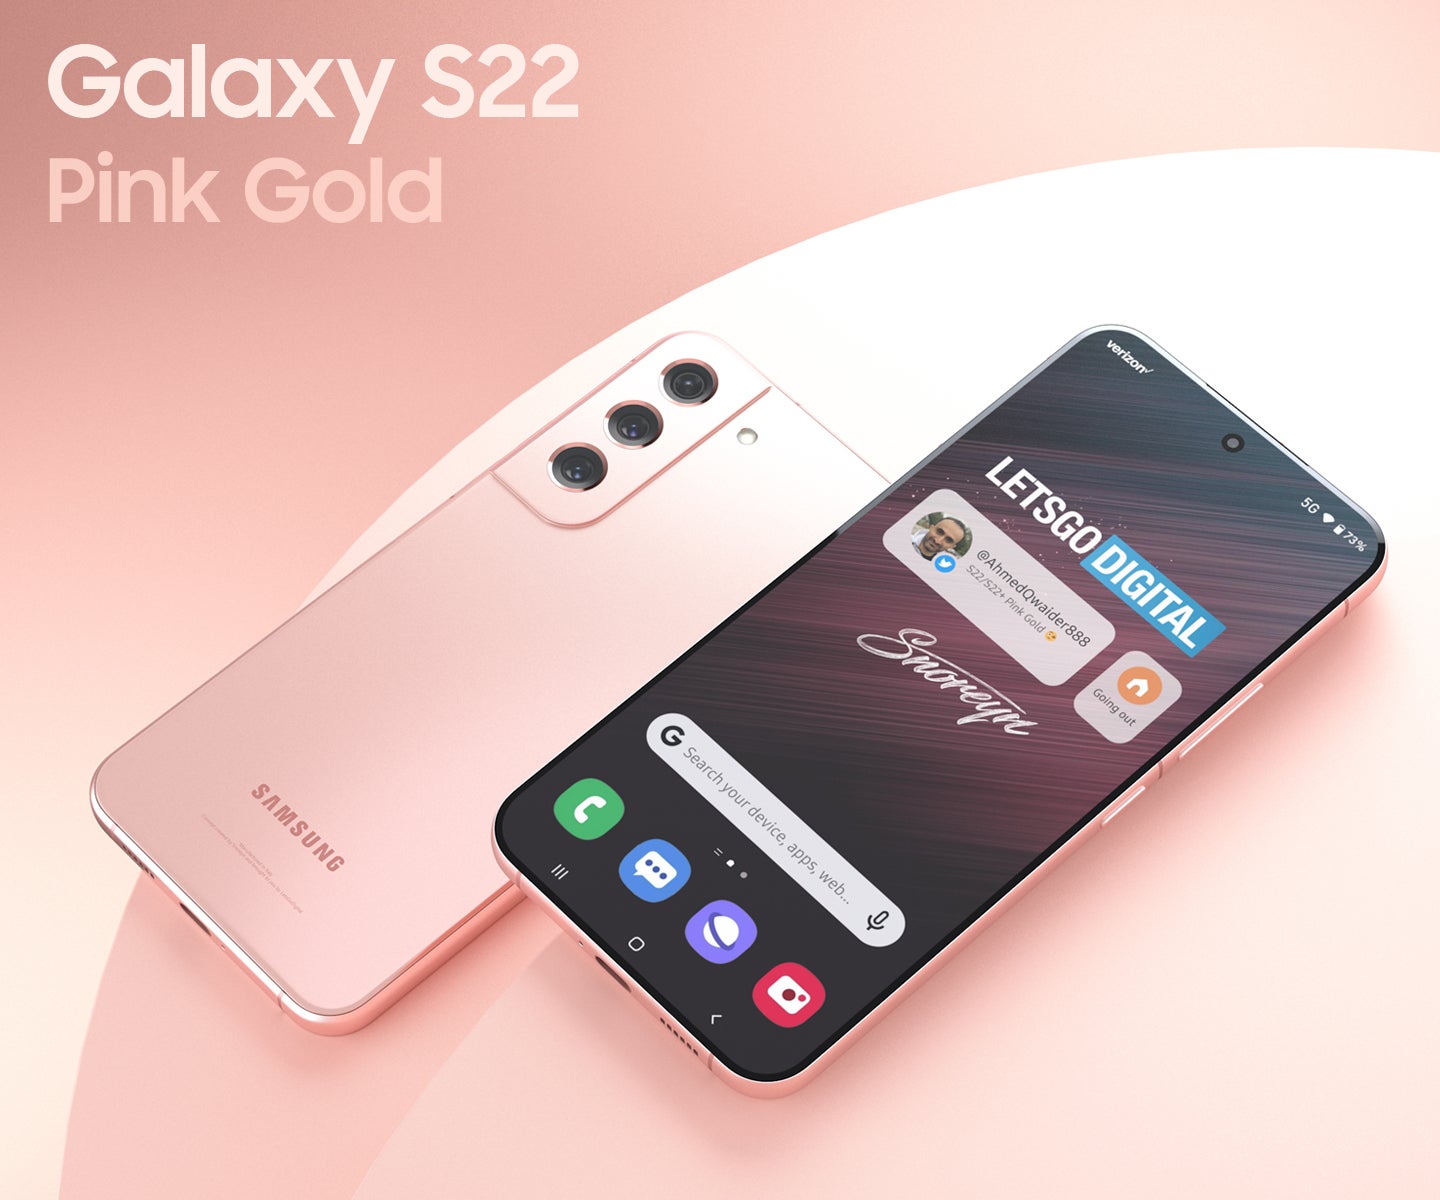 Samsung Galaxy S22 renders in a youthful Pink Gold color appear online